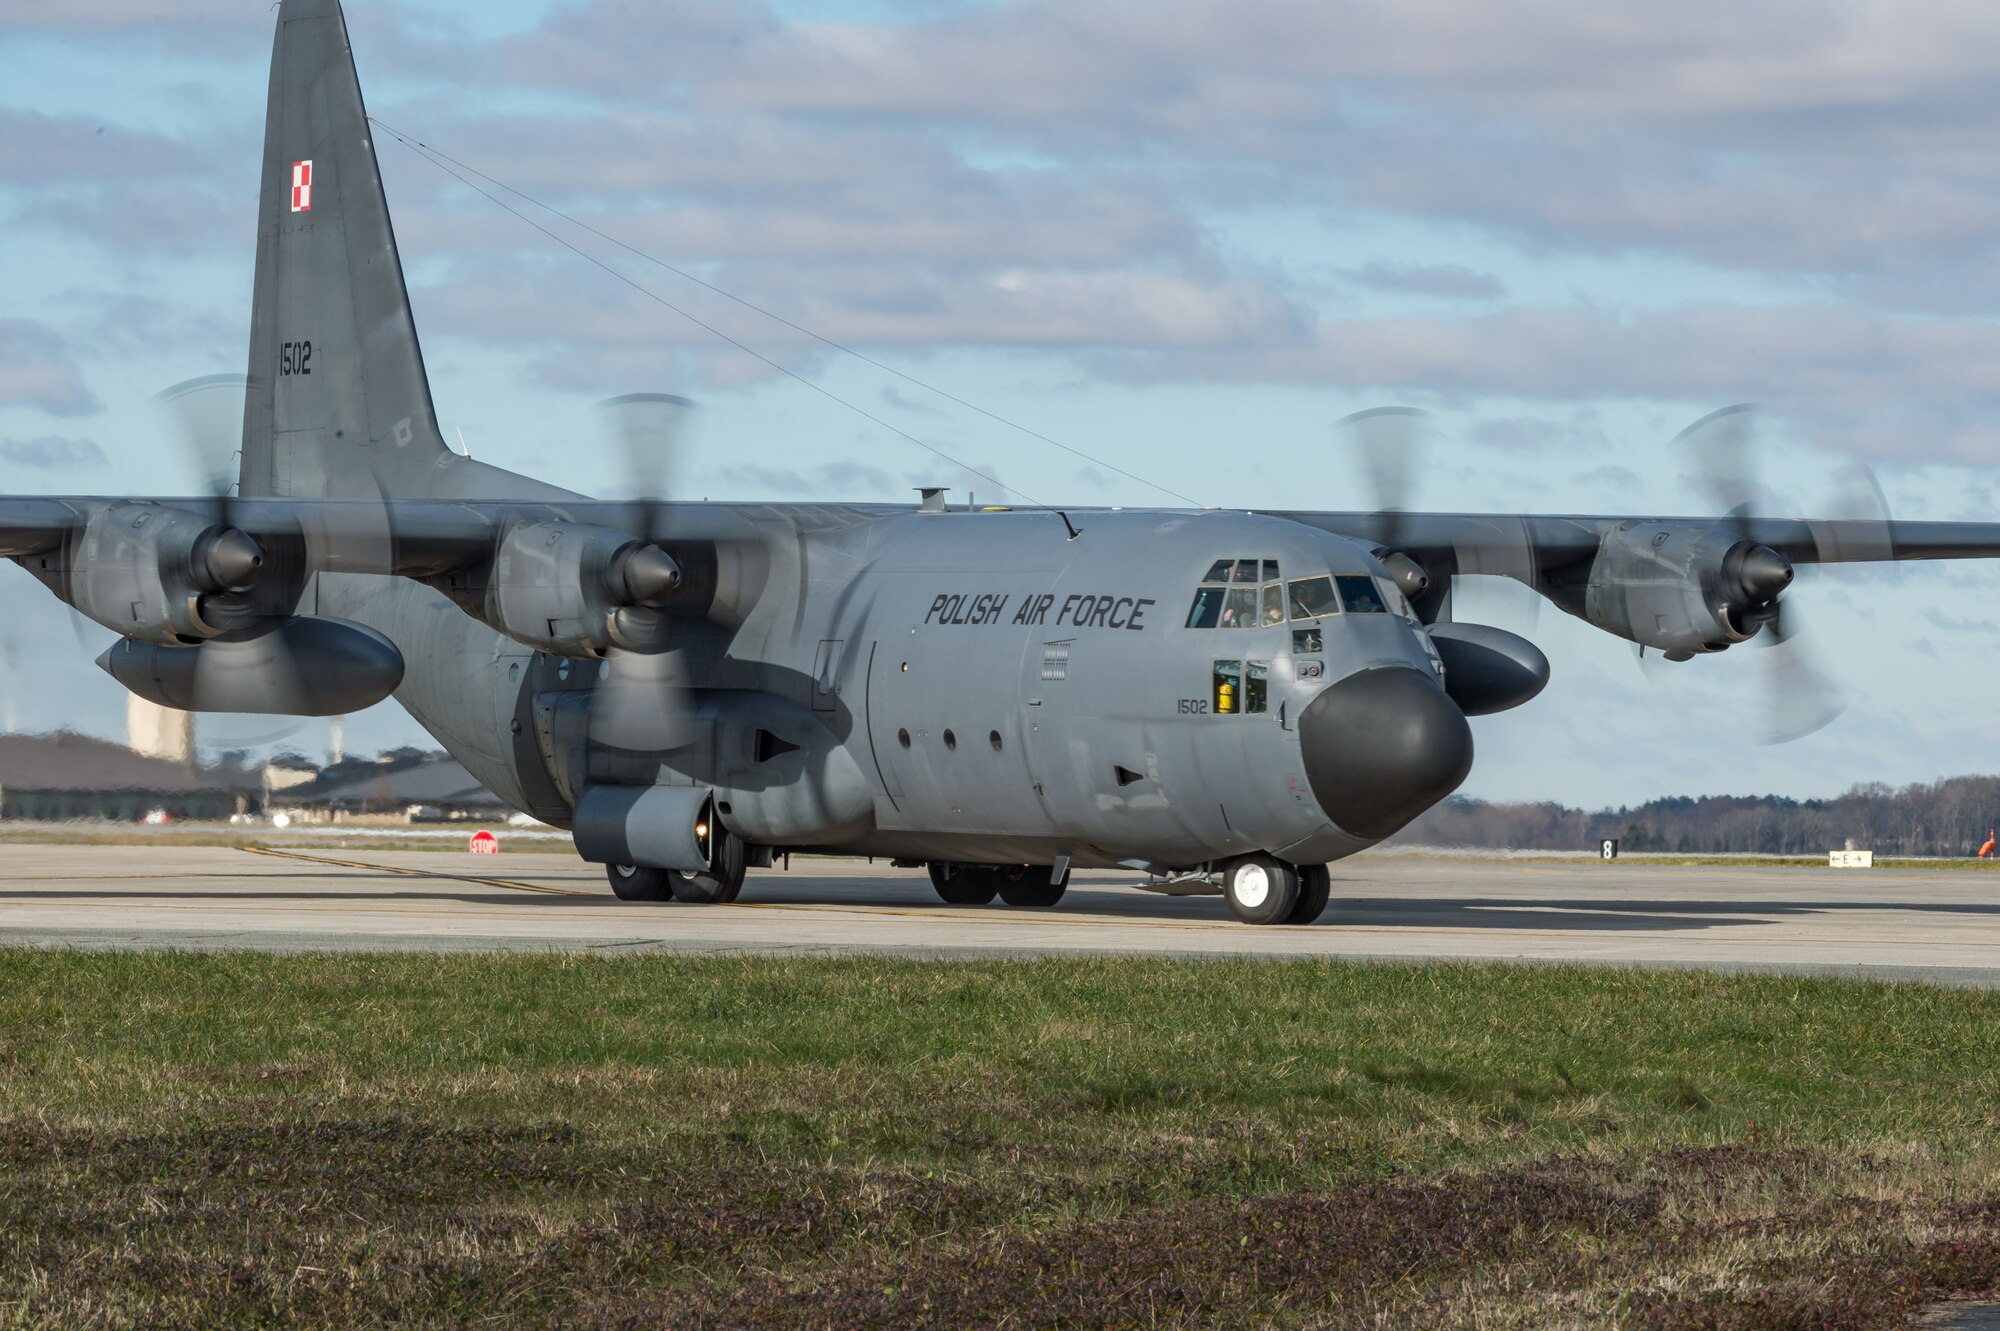 As part of a foreign military sales mission, a Polish air force C-130E Hercules taxis to a parking spot after landing to be unloaded by Airmen from the 436th Aerial Port Squadron Dec. 17, 2020, at Dover Air Force Base, Delaware. The United States and Poland have enjoyed warm bilateral relations since 1989. Poland is a stalwart NATO ally, with which the U.S. partners closely on NATO capabilities, counterterrorism, nonproliferation, missile defense and regional cooperation in Central and Eastern Europe. Due to its strategic location, Dover AFB supports approximately $3.5 billion worth of foreign military sales annually. (U.S. Air Force photo by Roland Balik)